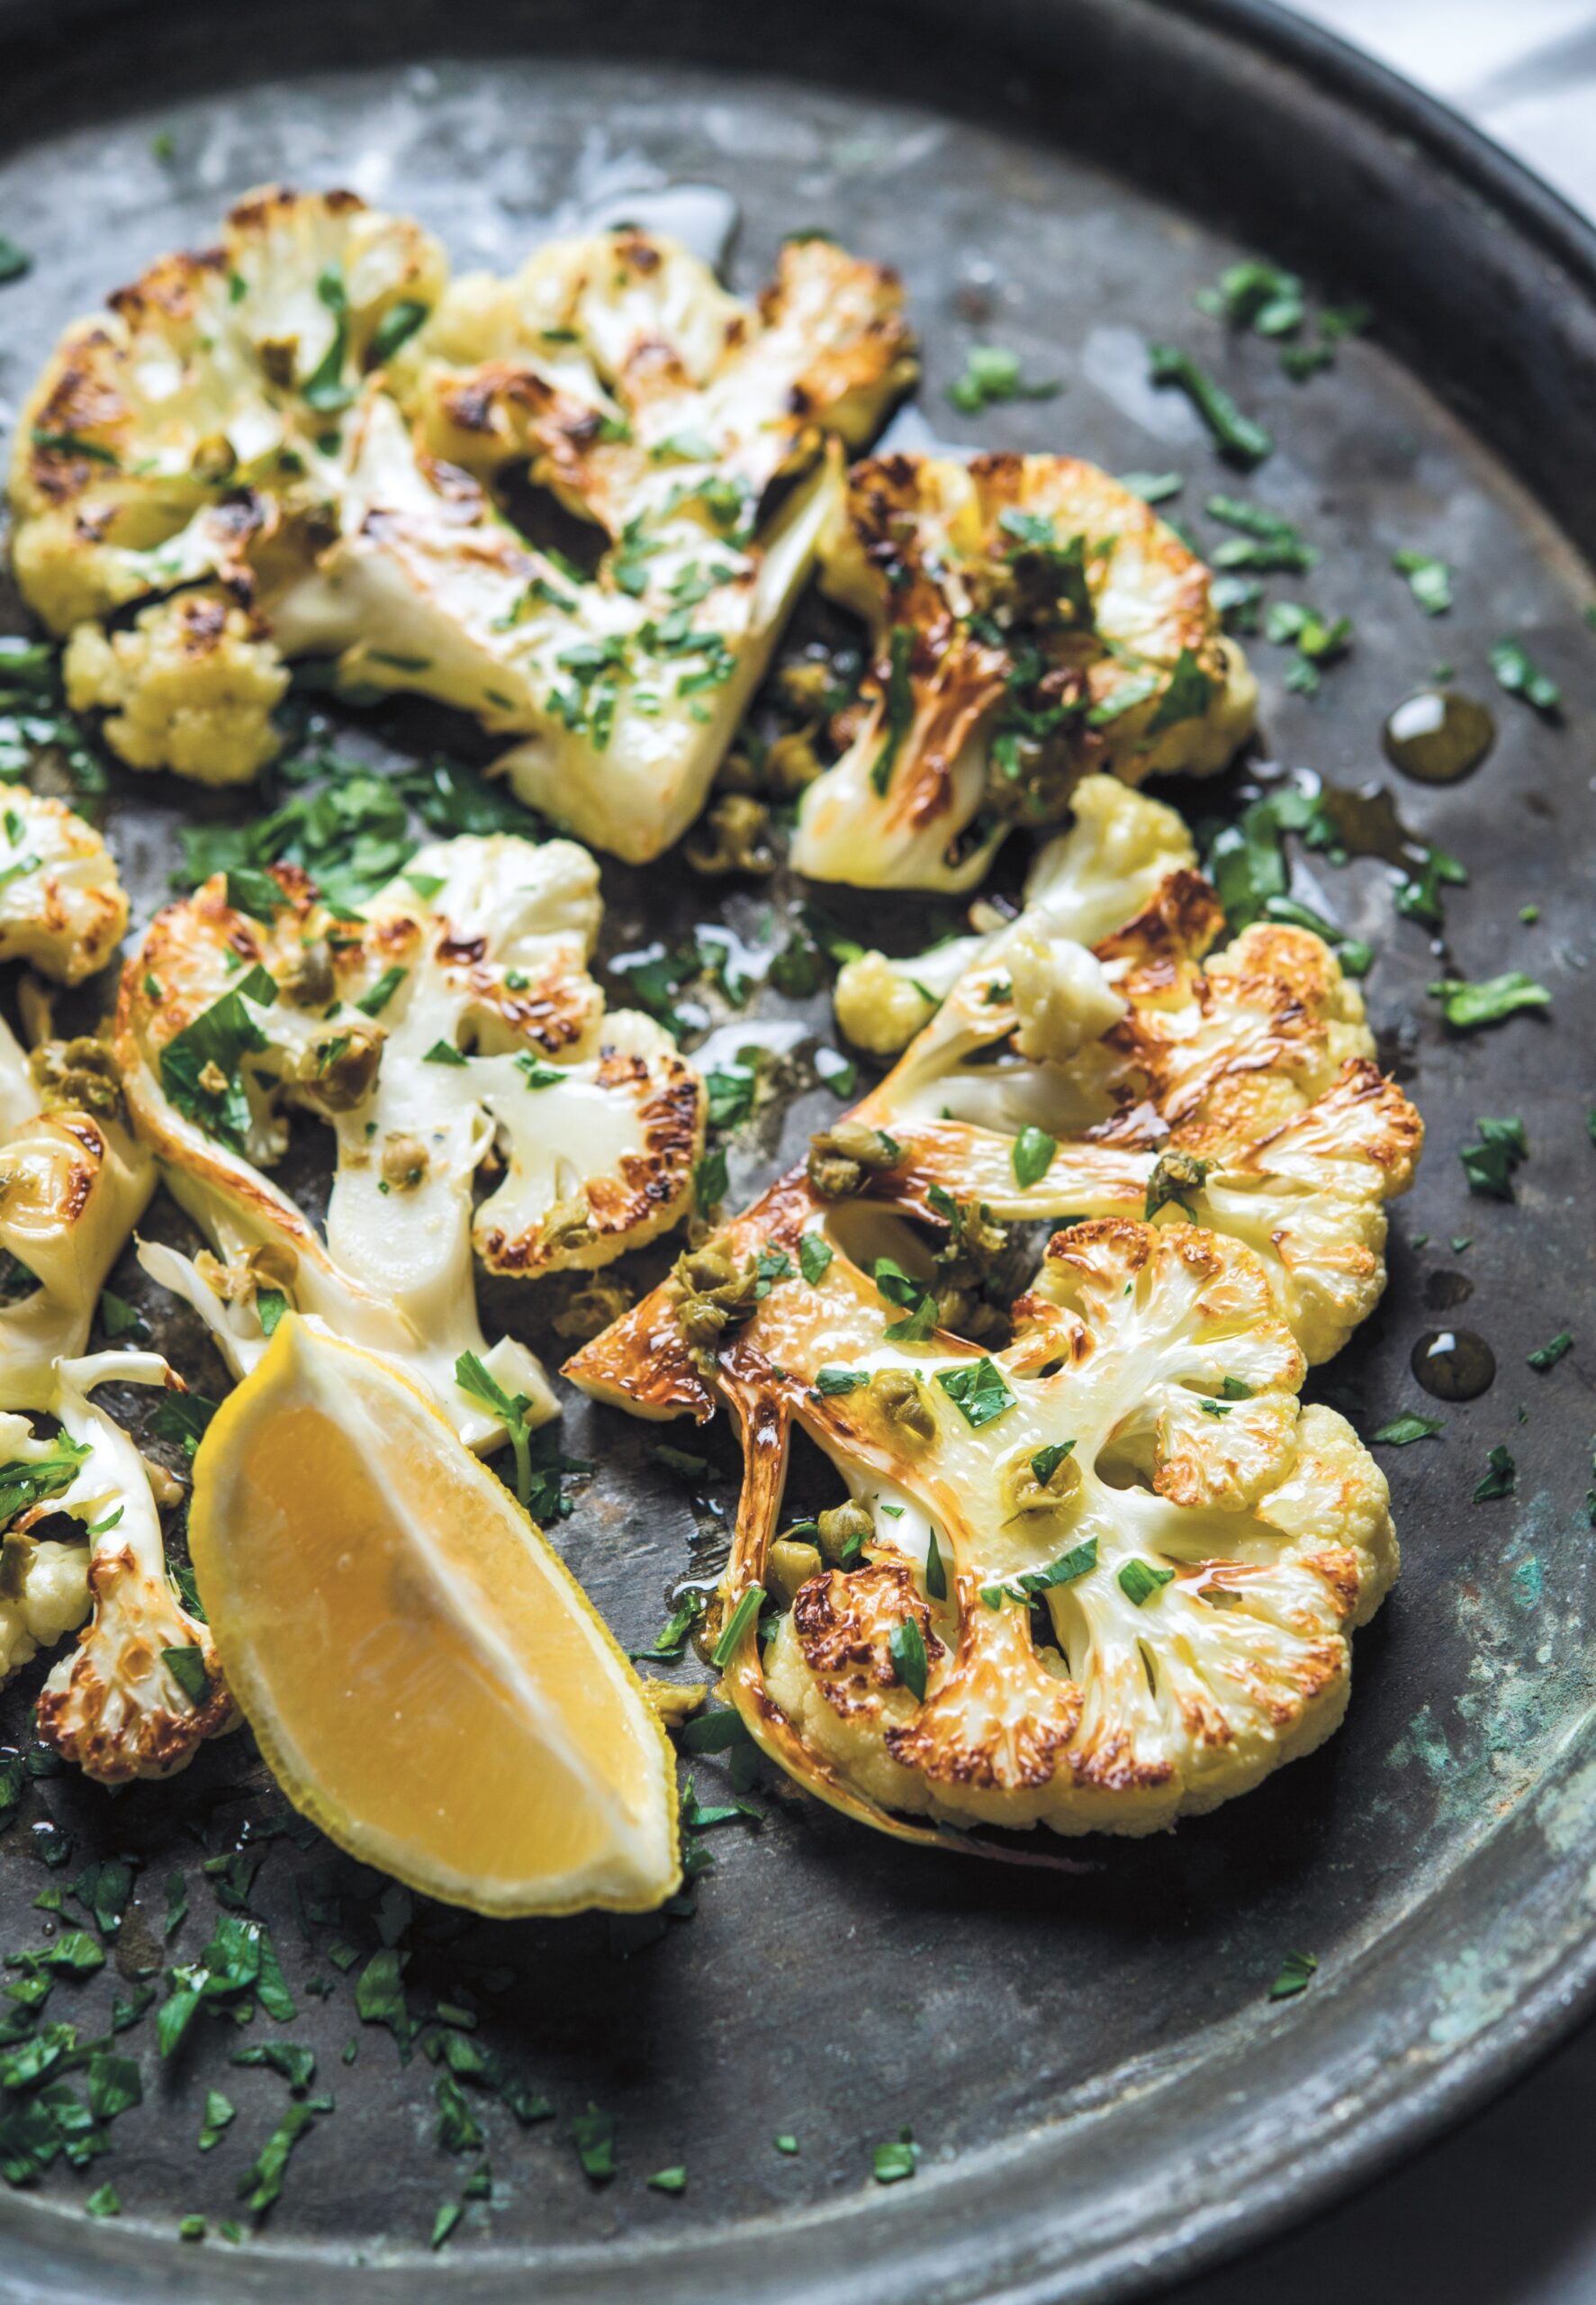 Recipe For Seared Cauliflower With Anchovy, Lemon, And Capers